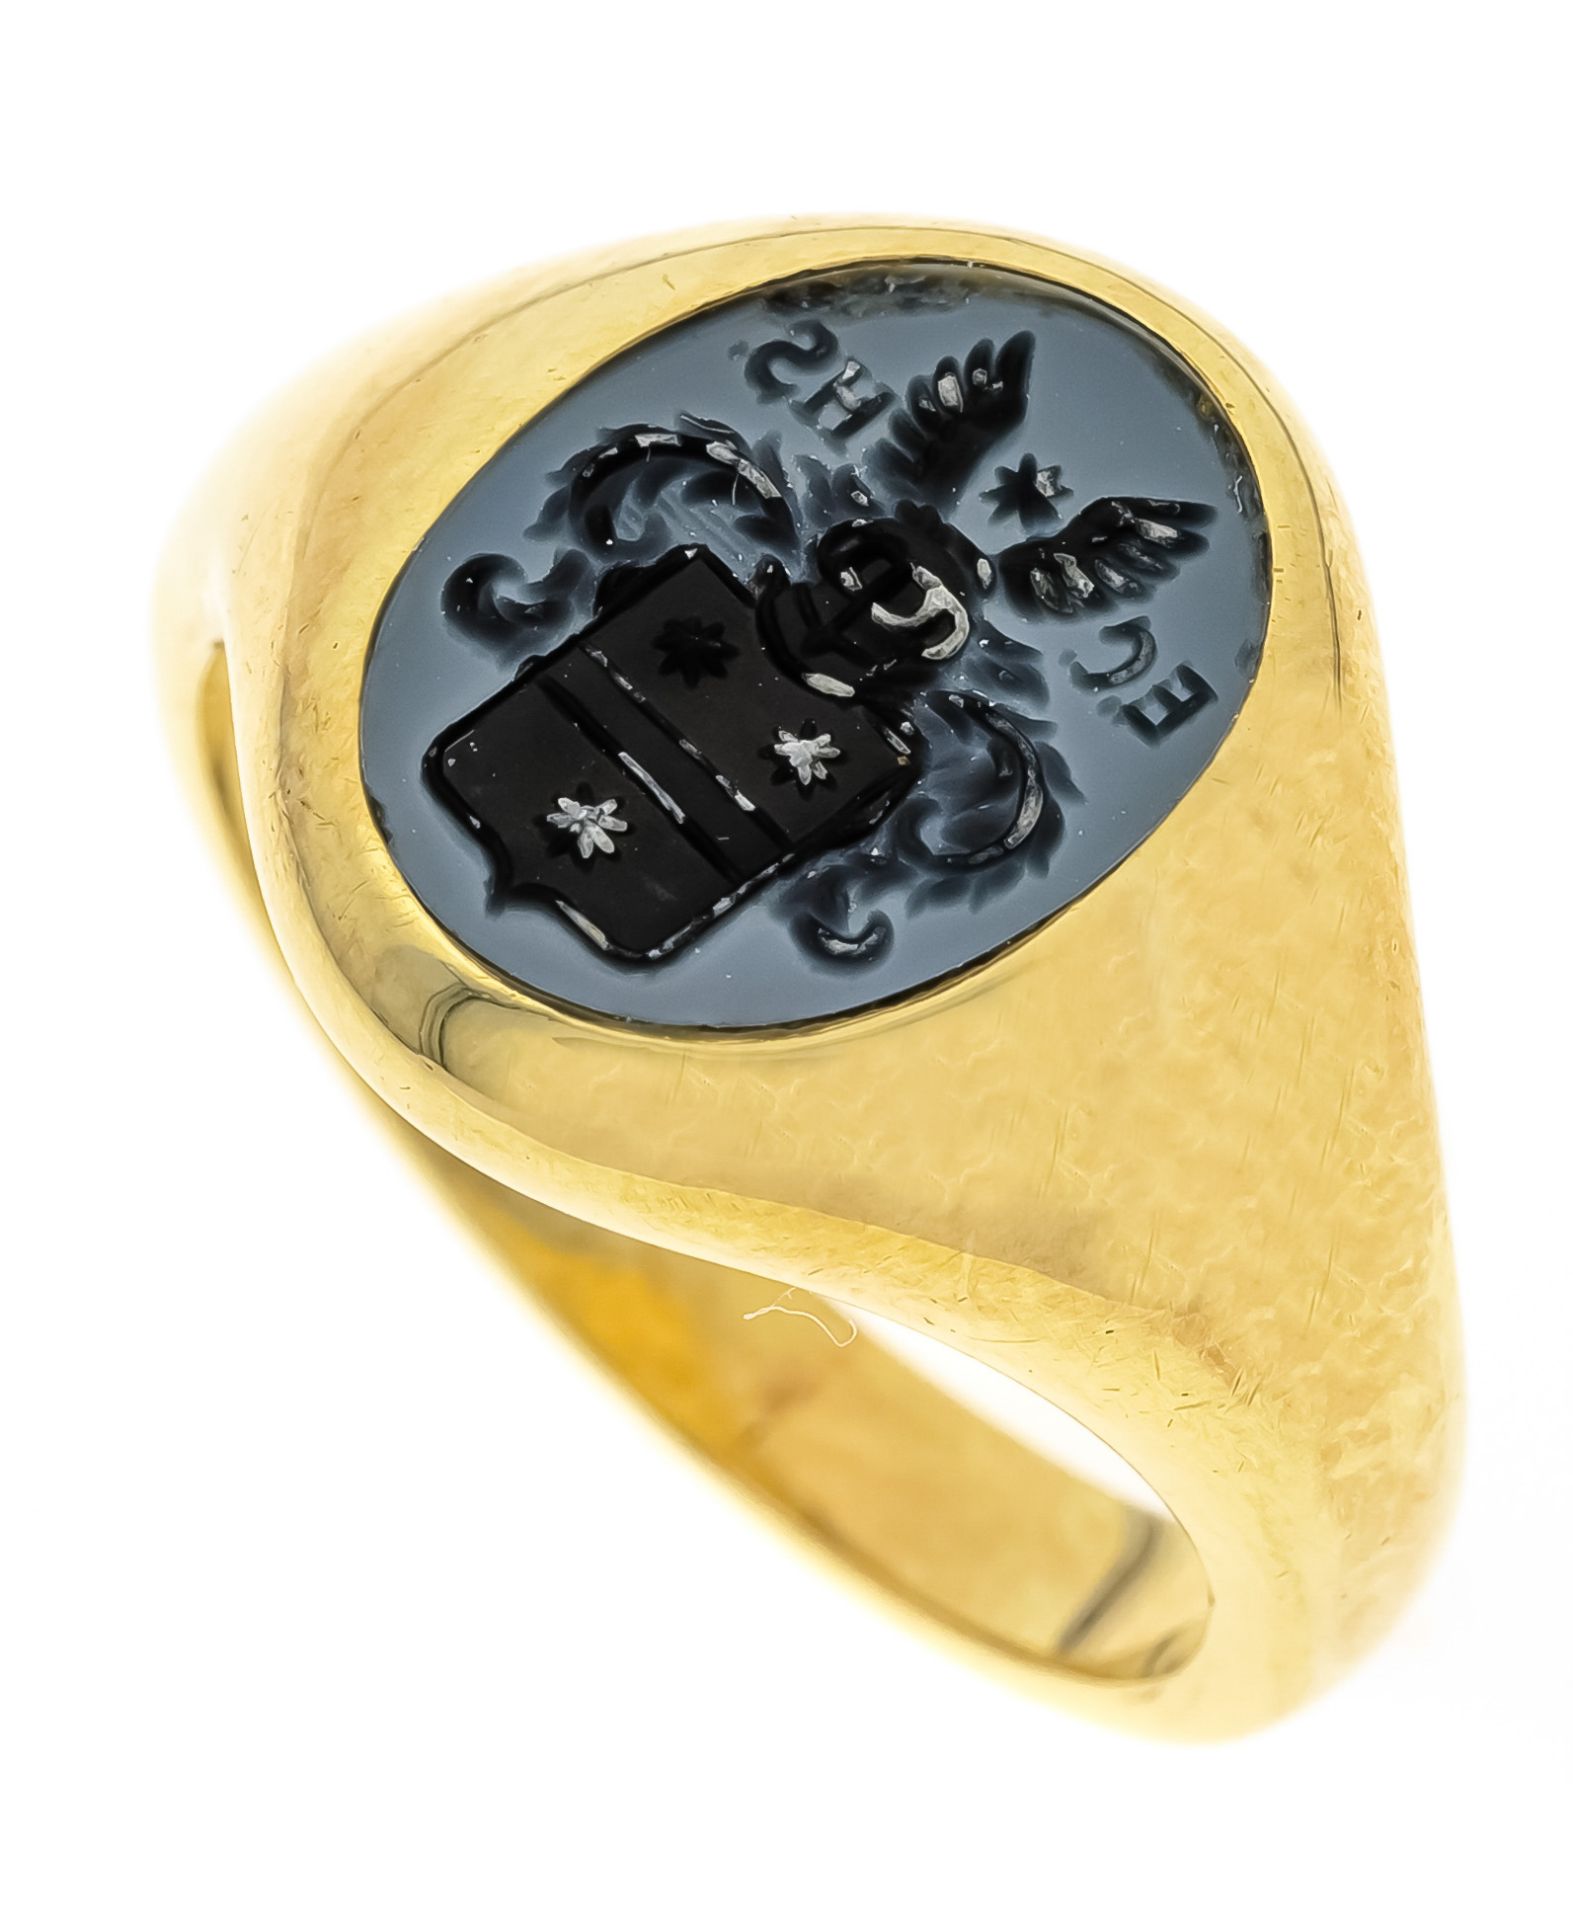 Coat of arms seal ring GG 585/000 with a cut coat of arms in an oval blue layer stone 12 x 9 mm,